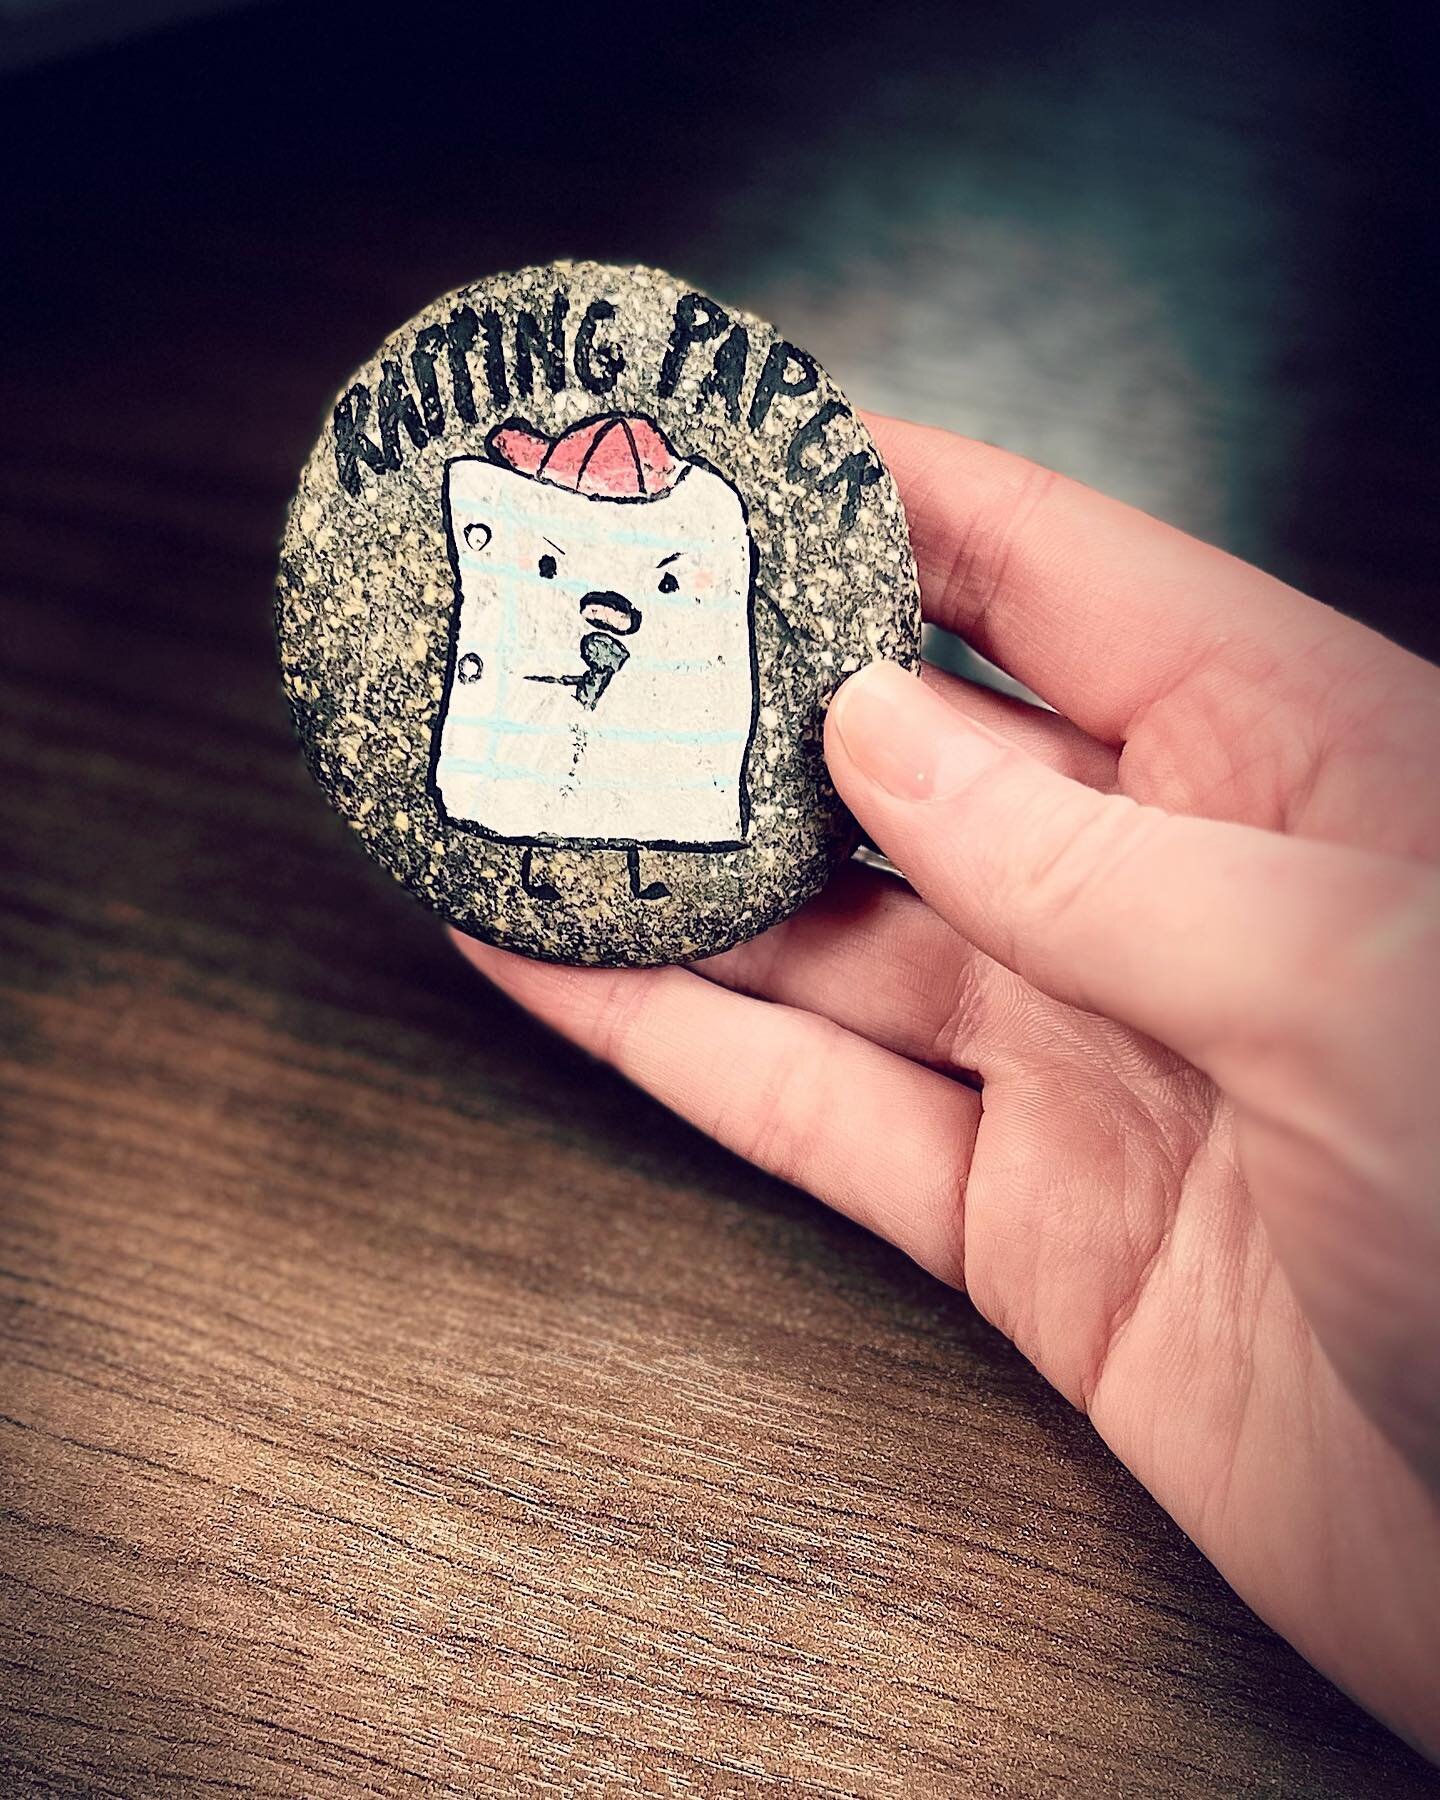 &hellip;.Would you call this a &ldquo;pun-ice&rdquo;stone?  Because, I would 😎😂

Someone left this lil guy on my desk yesterday&hellip; I don&rsquo;t know who it was, but lemme just say, it made me smile. 😊

#puns #rappingpaper #funny #treasures #